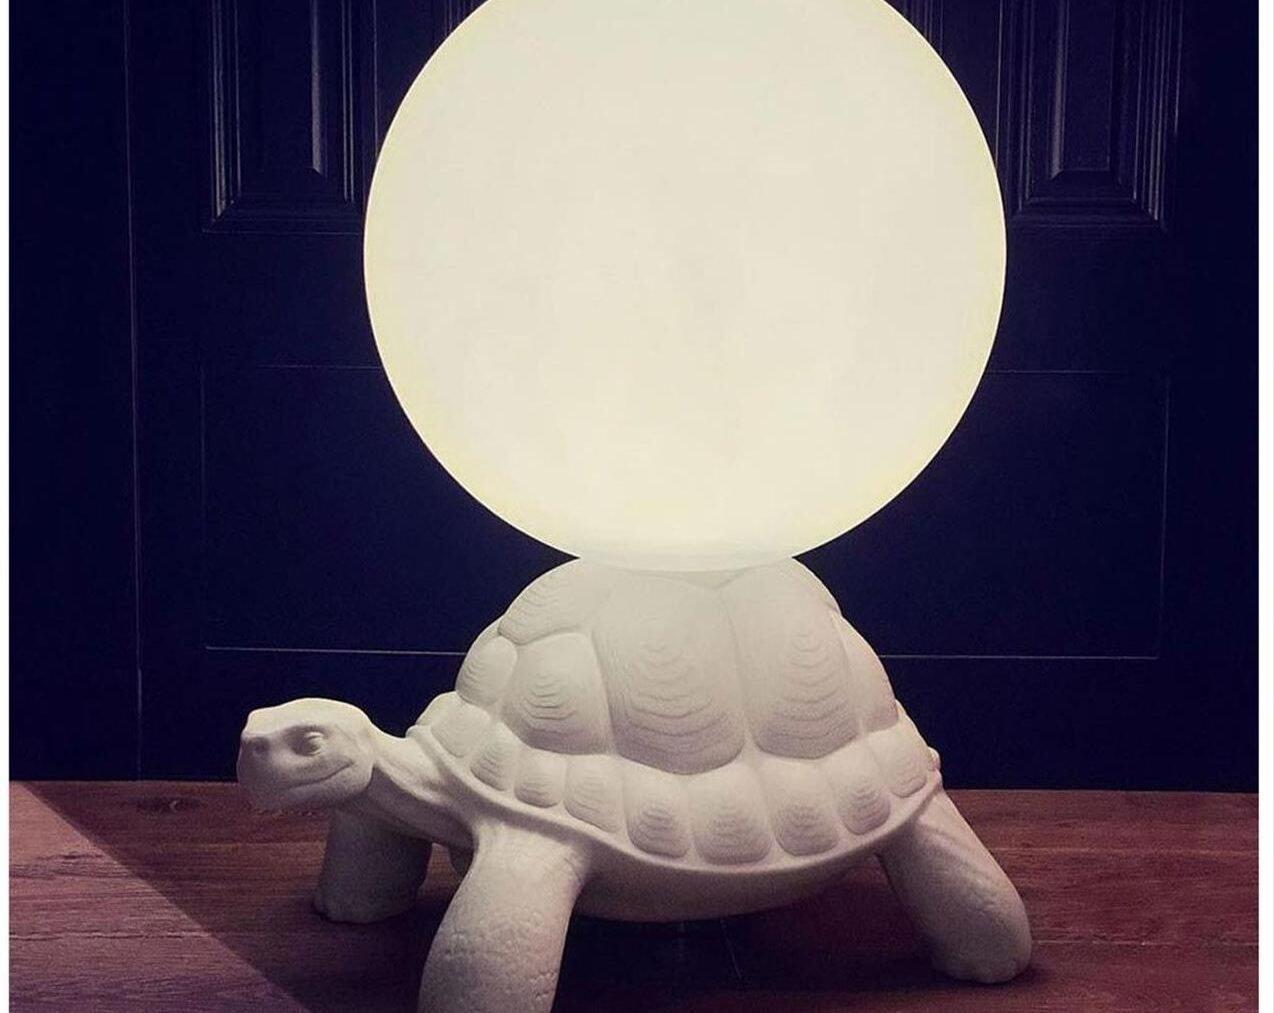 Turtle-Carry-Lamp-White